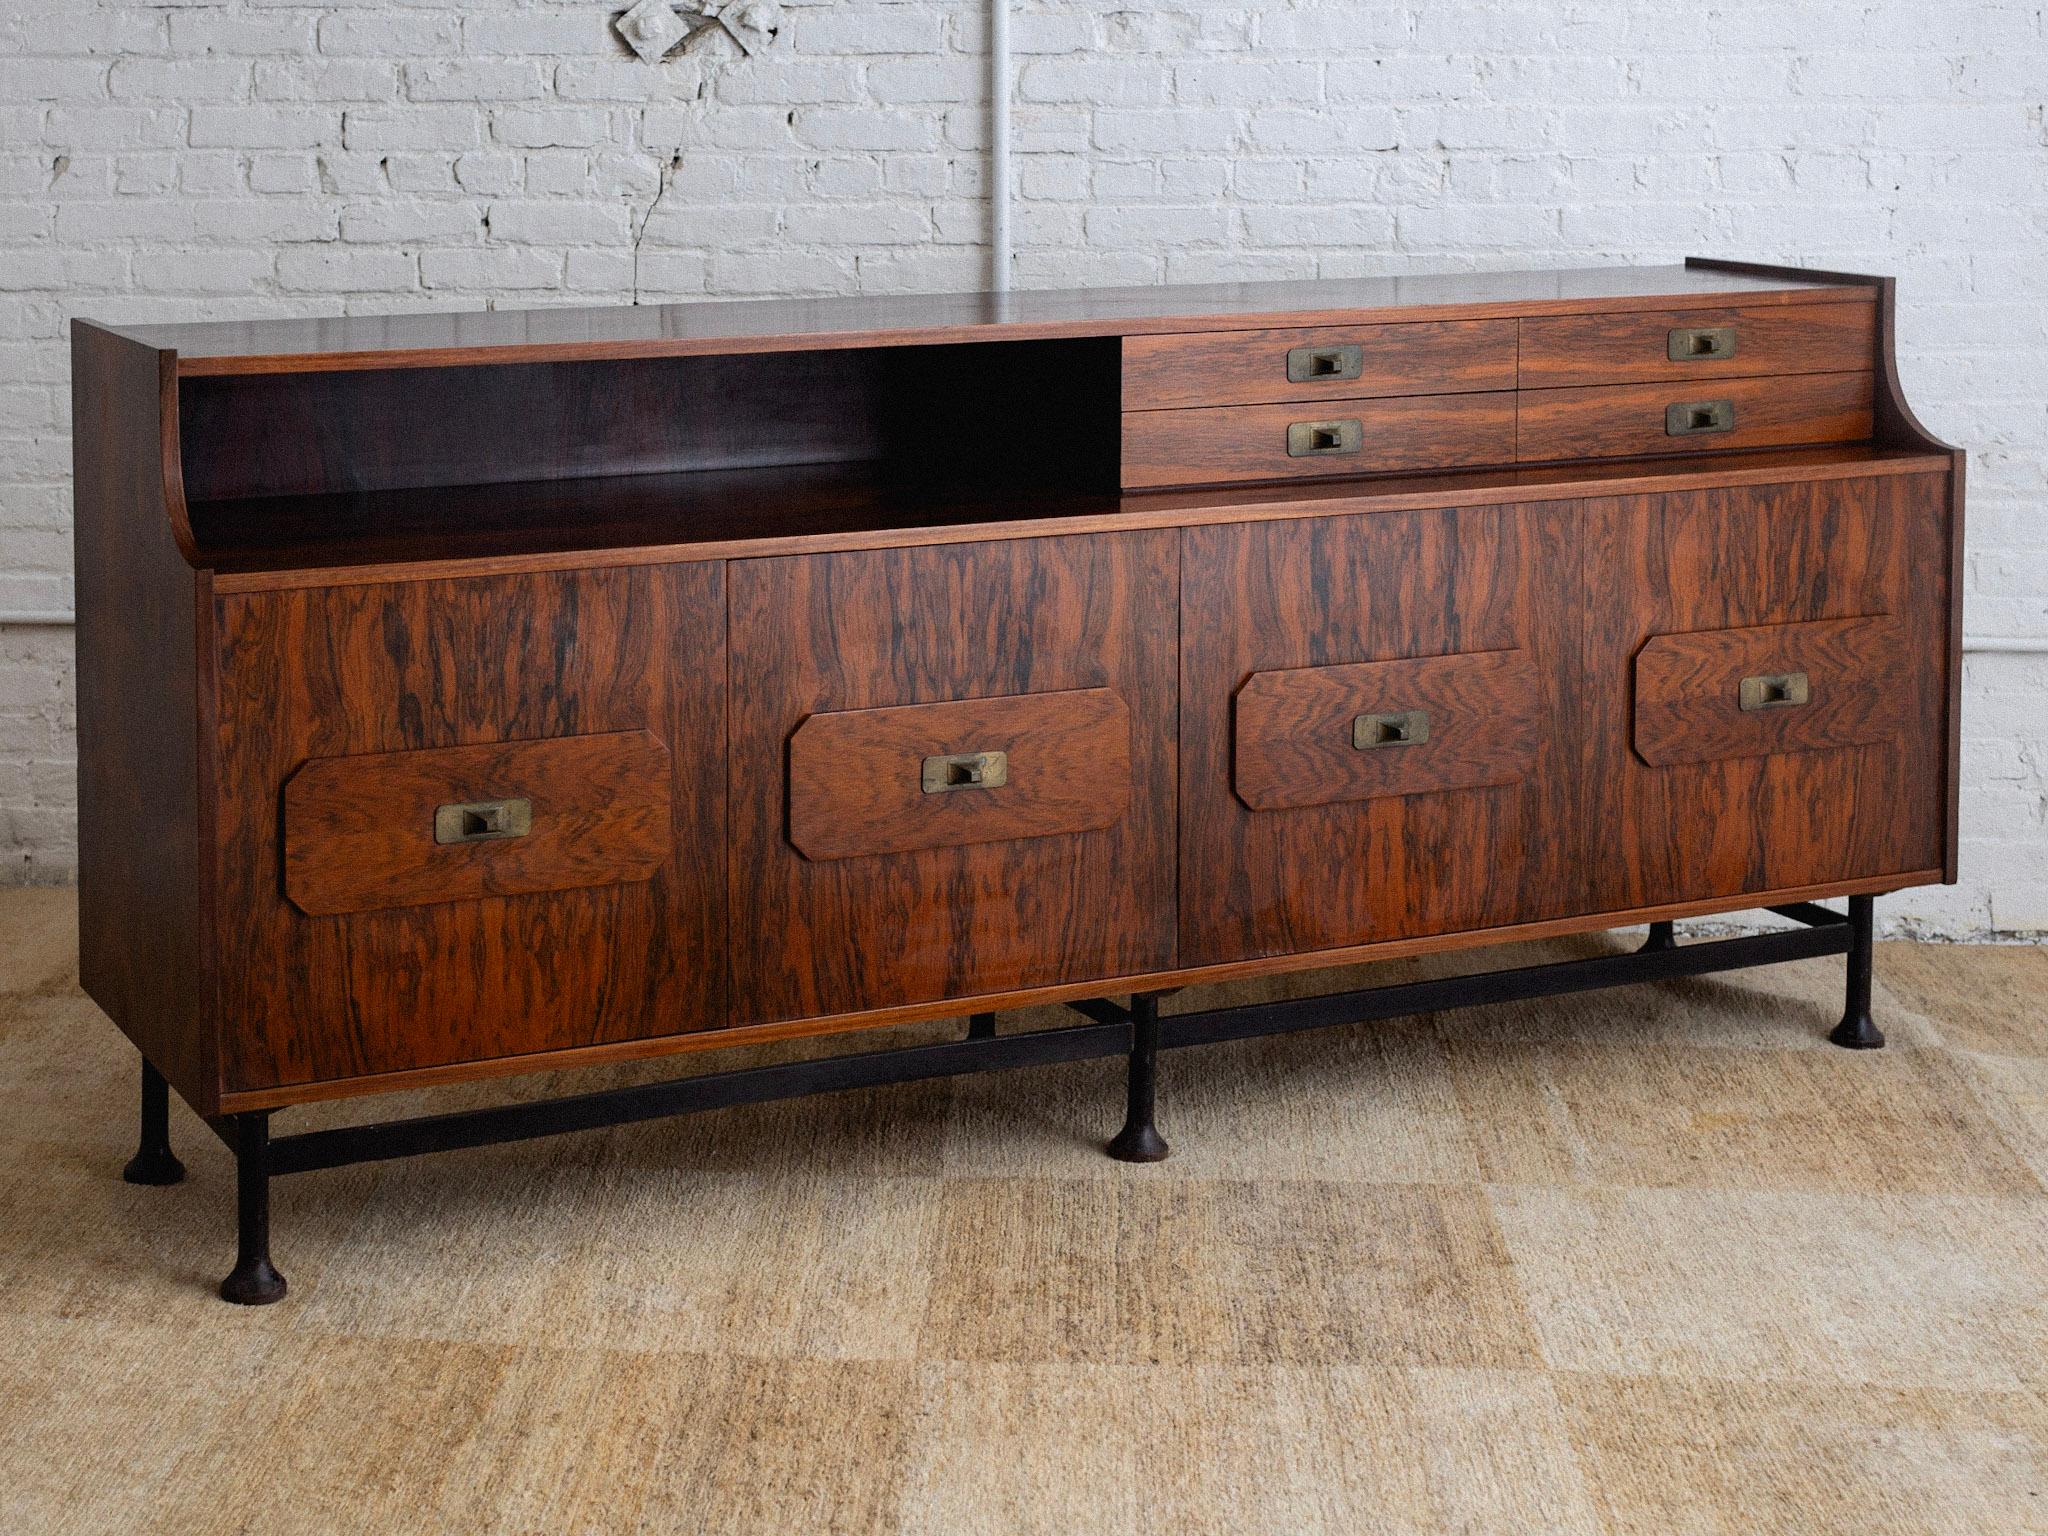 A mid century Brazilian style rosewood credenza. Credenza sits upon a sculpted iron base and features brass drawer pulls. Four doors open to reveal two cabinets, each with an inner shelf. Four petite upper drawers. Original unrestored finish.